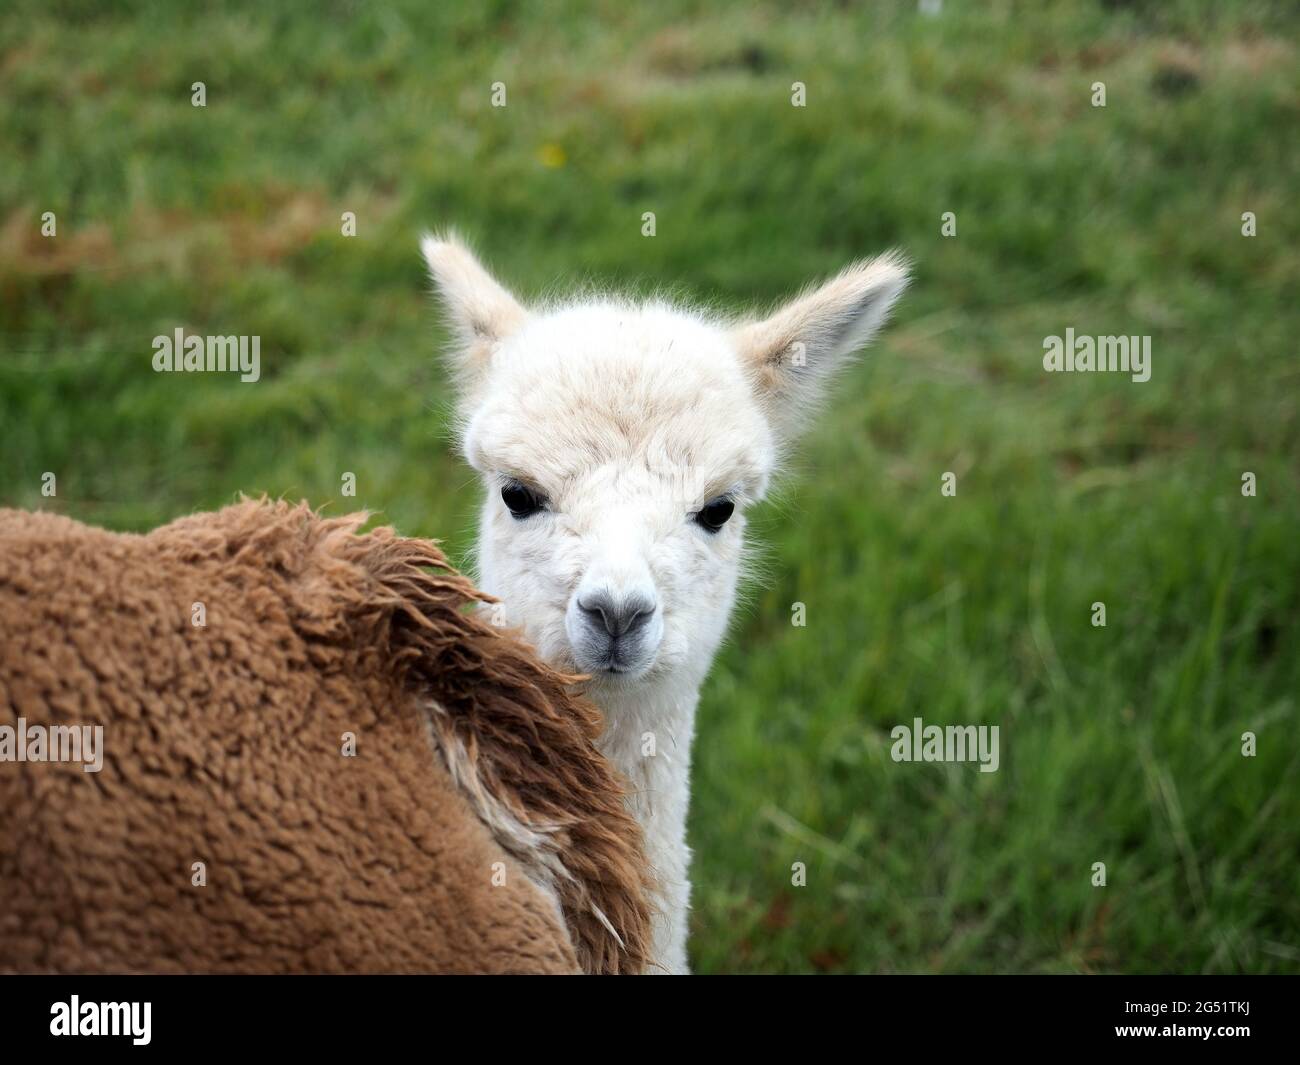 View of a cute baby Alpaca staring at the camera Stock Photo